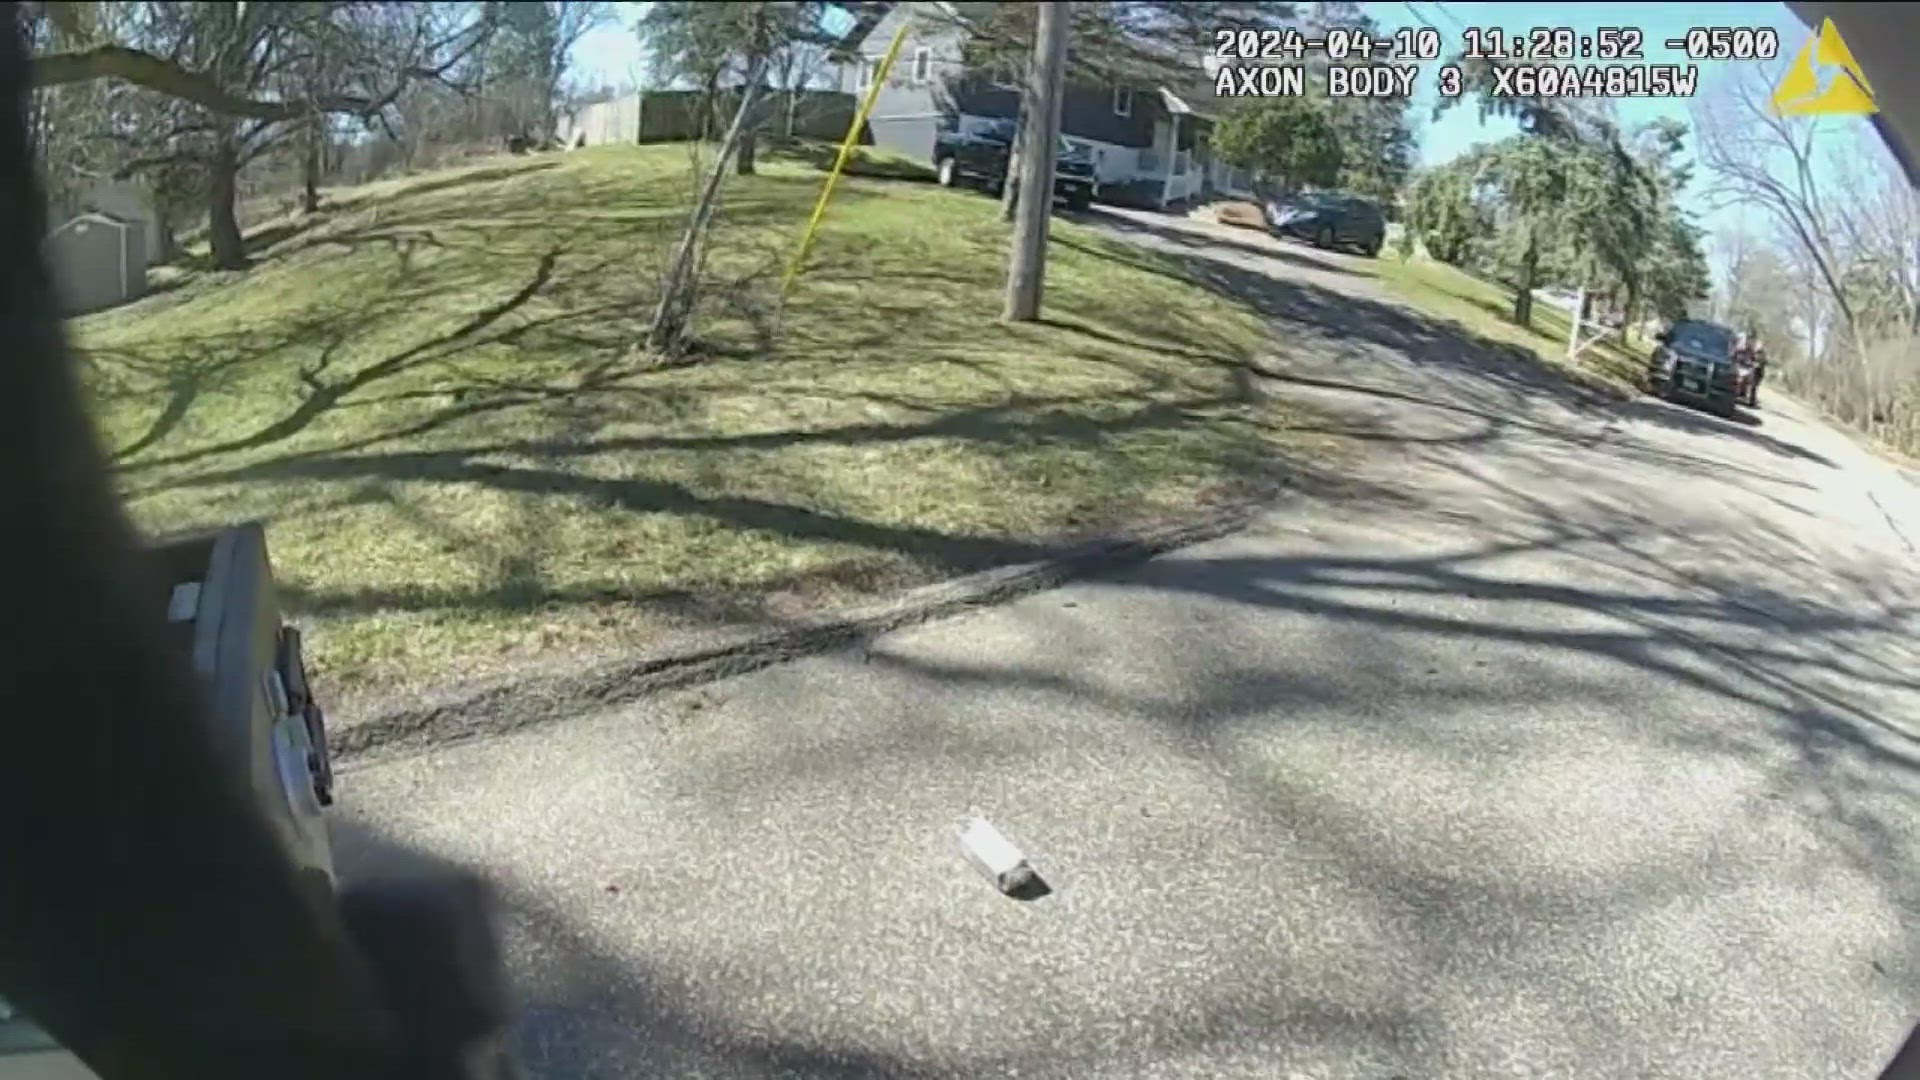 The Hennepin County Sheriff's Office released body-cam video Wednesday from the deadly police shooting in Minnetonka that also left two deputies injured.